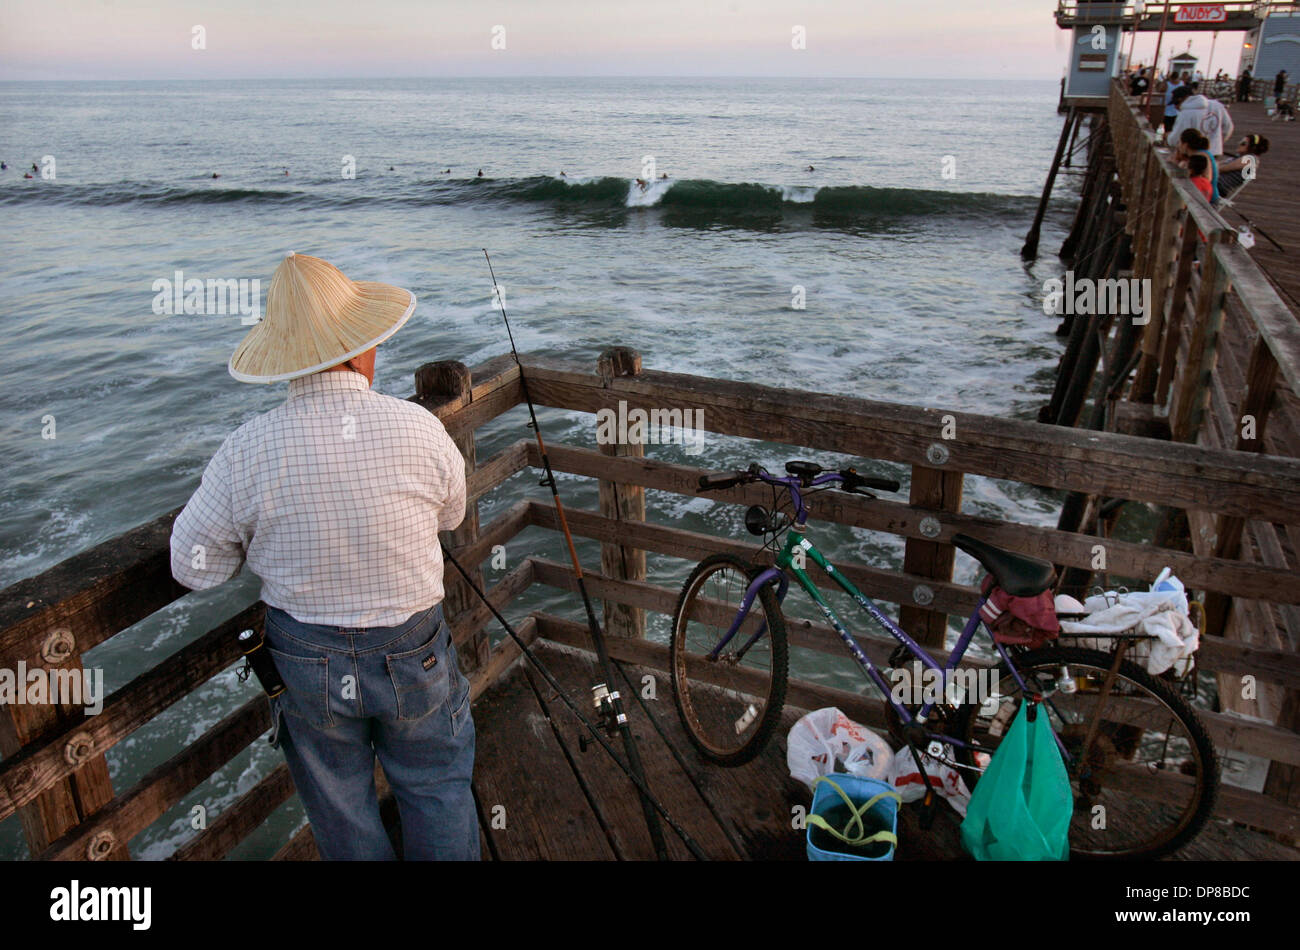 (Published 10/8/2006, B-7:CO,C)  June 1, 2006, Oceanside, California, USA A man named LIN (cq) fishes from the south side of the Oceanside Pier in the evening as a a surfer takes off on a wave nearby Mandatory Credit: photo by Charlie Neuman/San Diego Union-Tribune/Zuma Press. copyright 2006 San Diego Union-Tribune Stock Photo